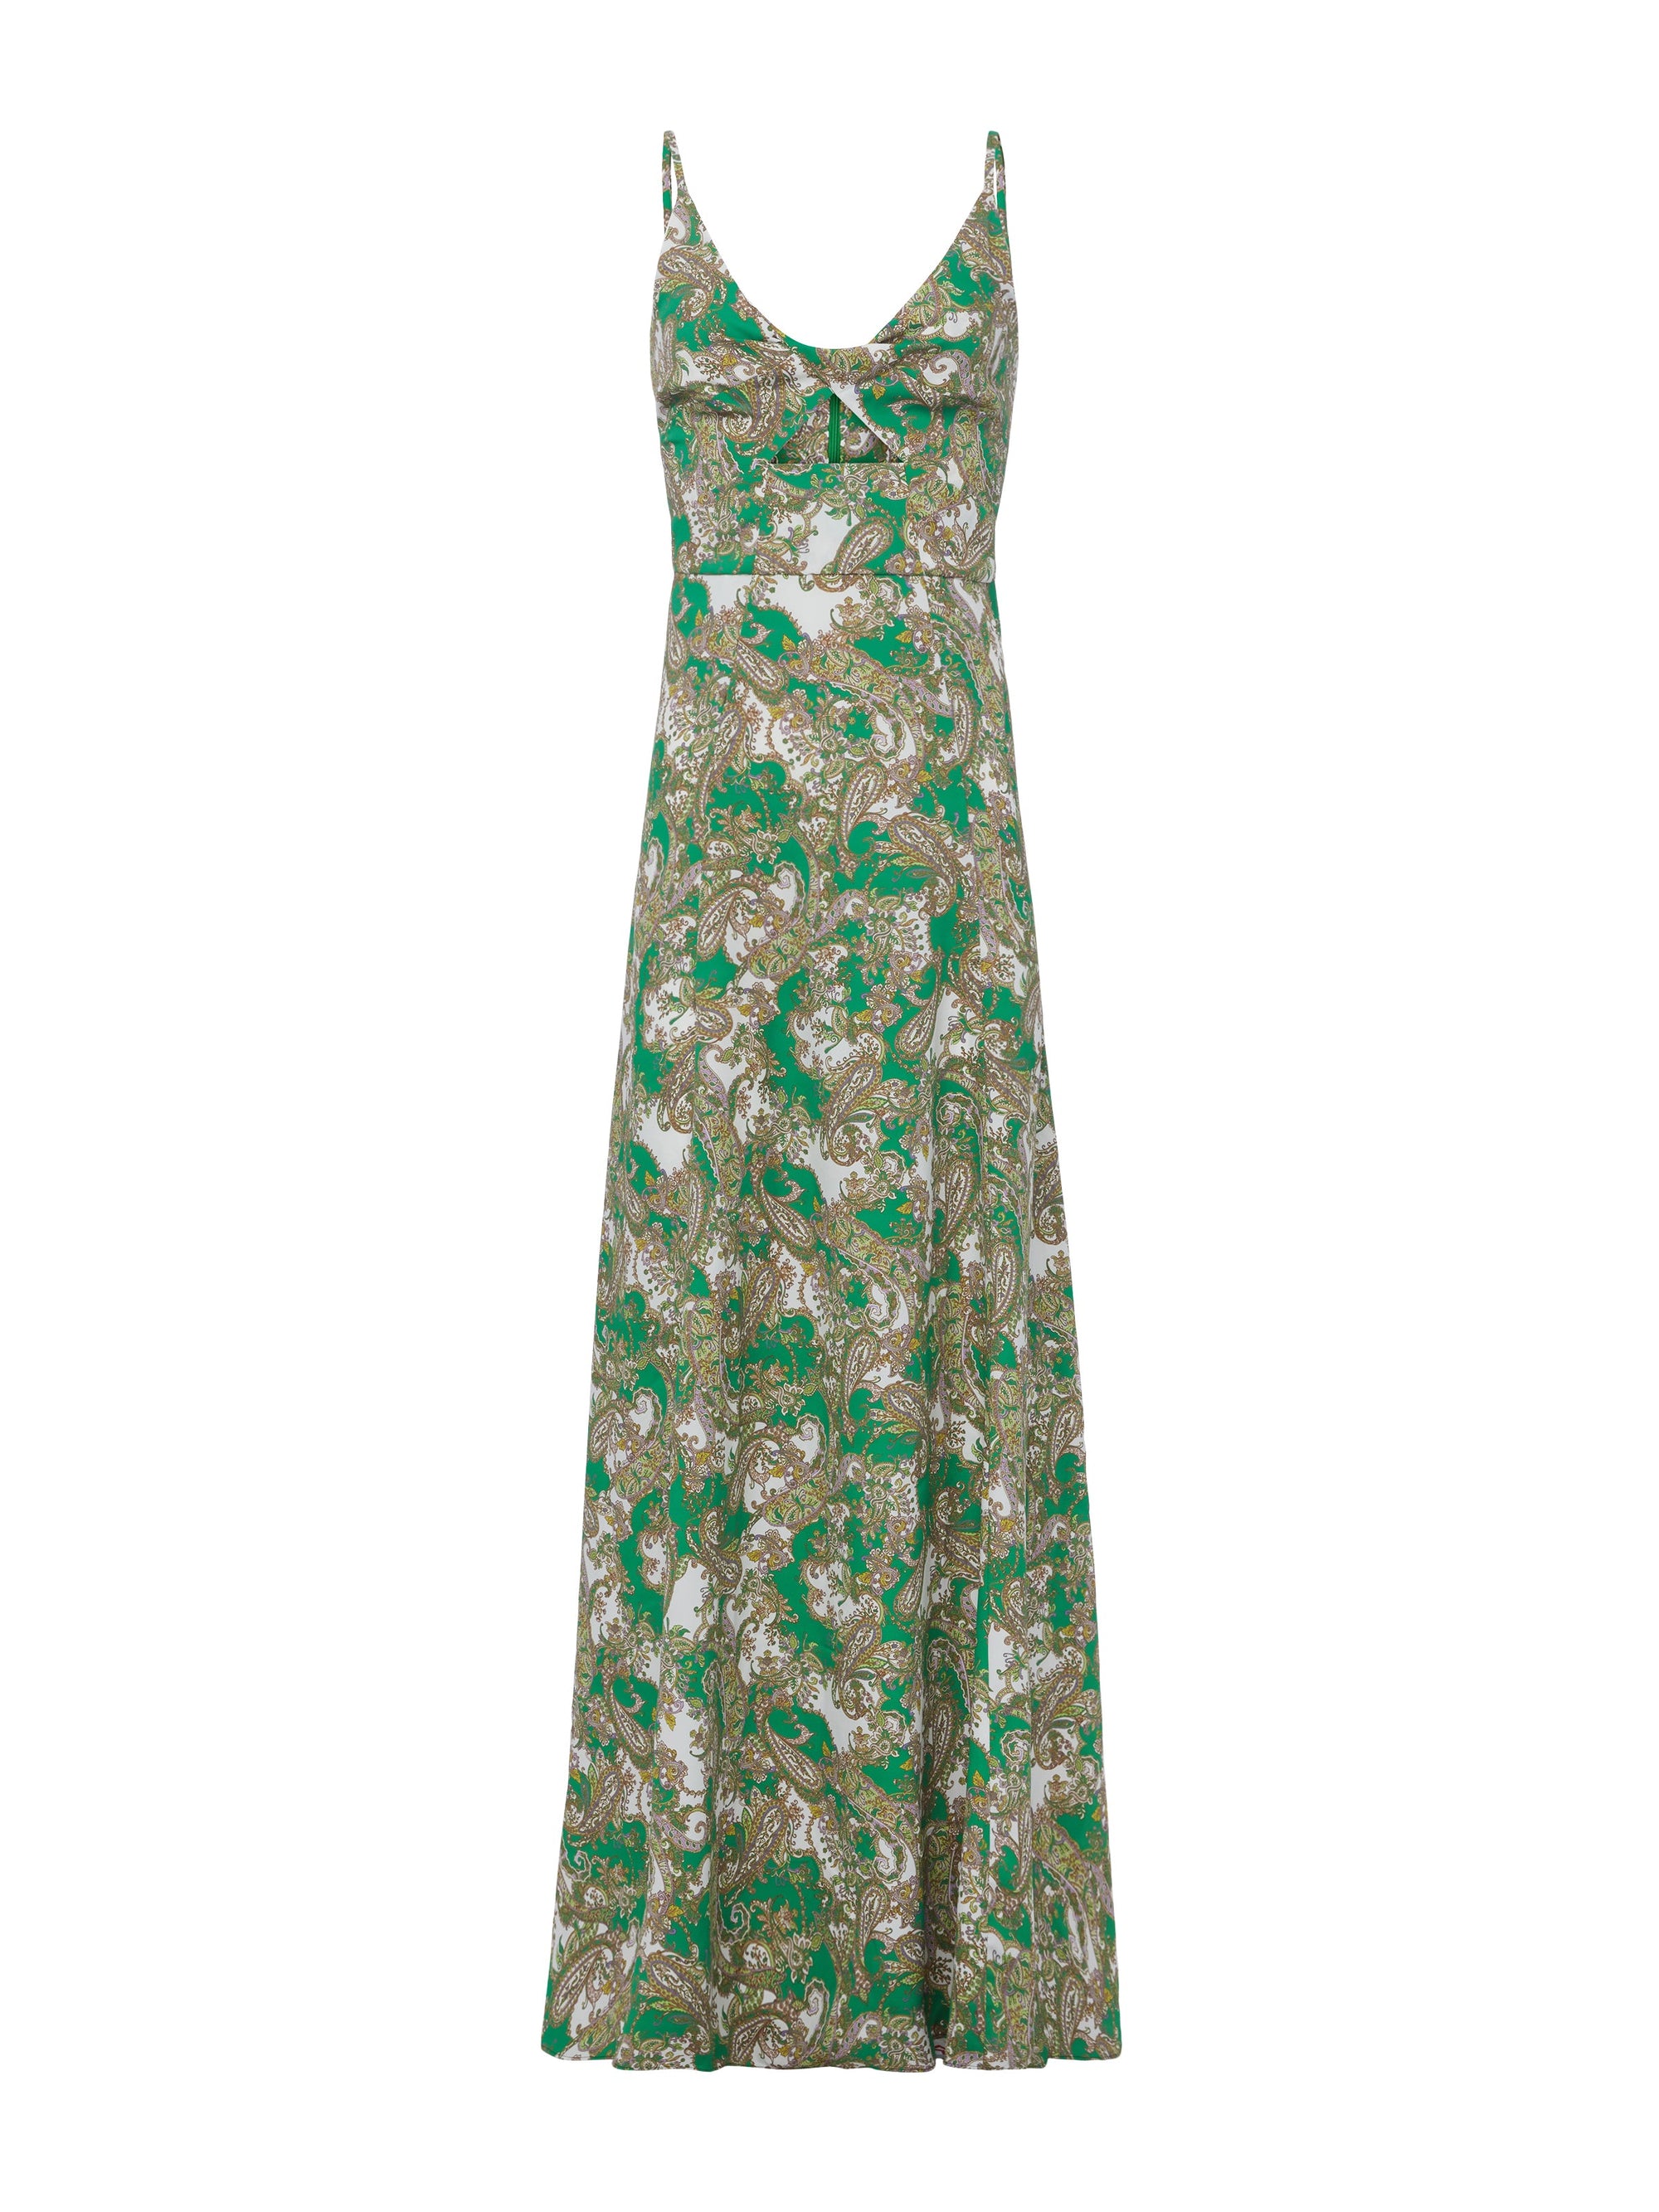 Porter Twisted Front Dress in Grass Paisley Print by L'AGENCE